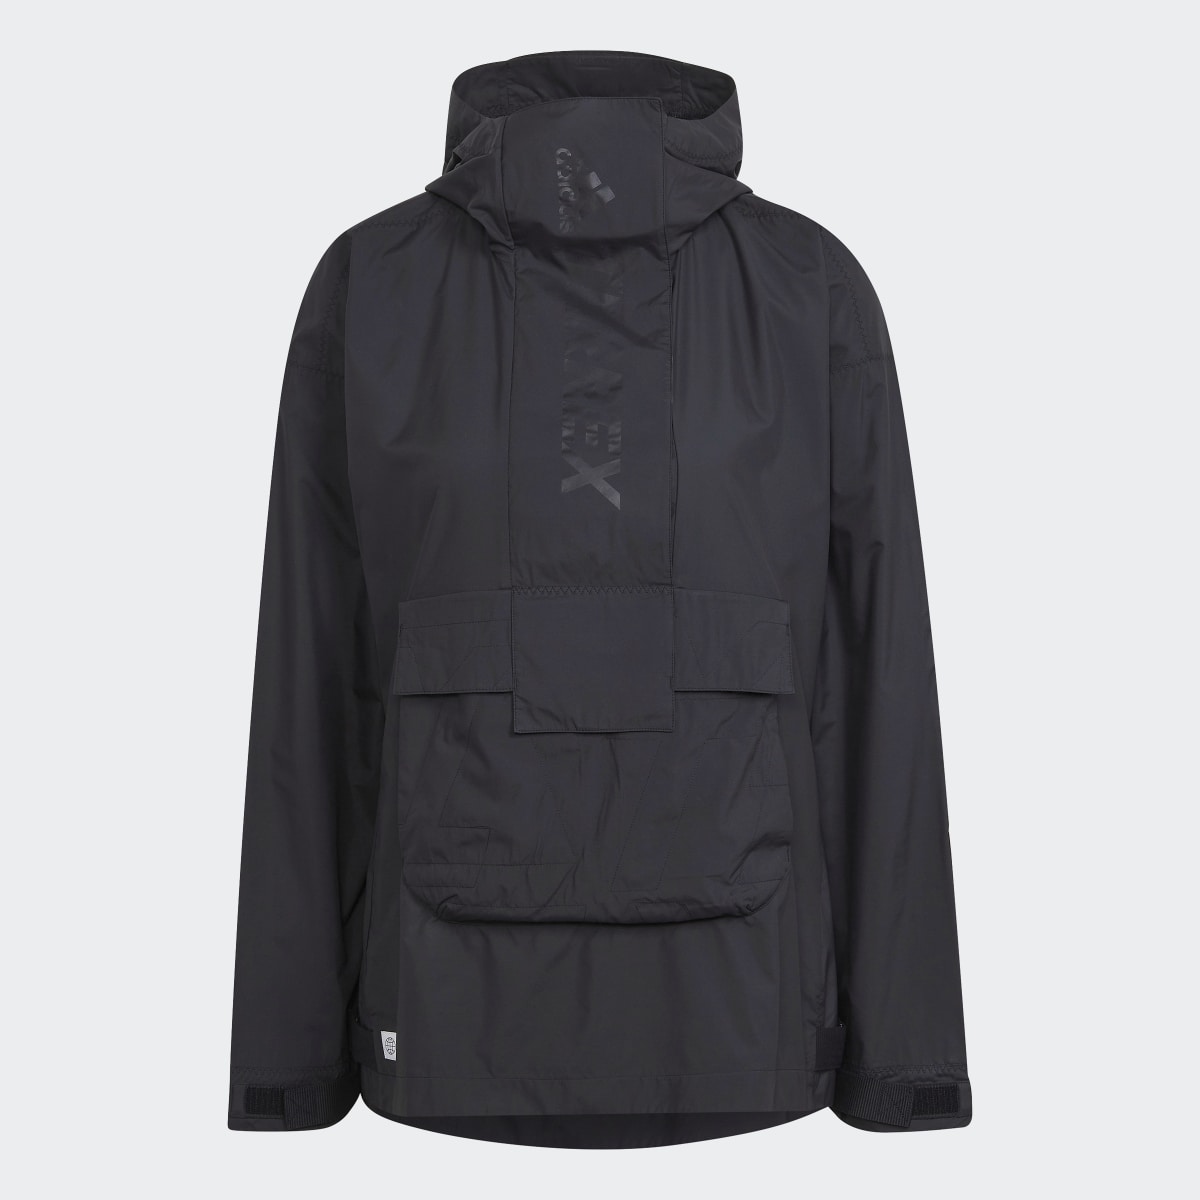 Adidas Terrex Made to be Remade Wind Anorak. 5